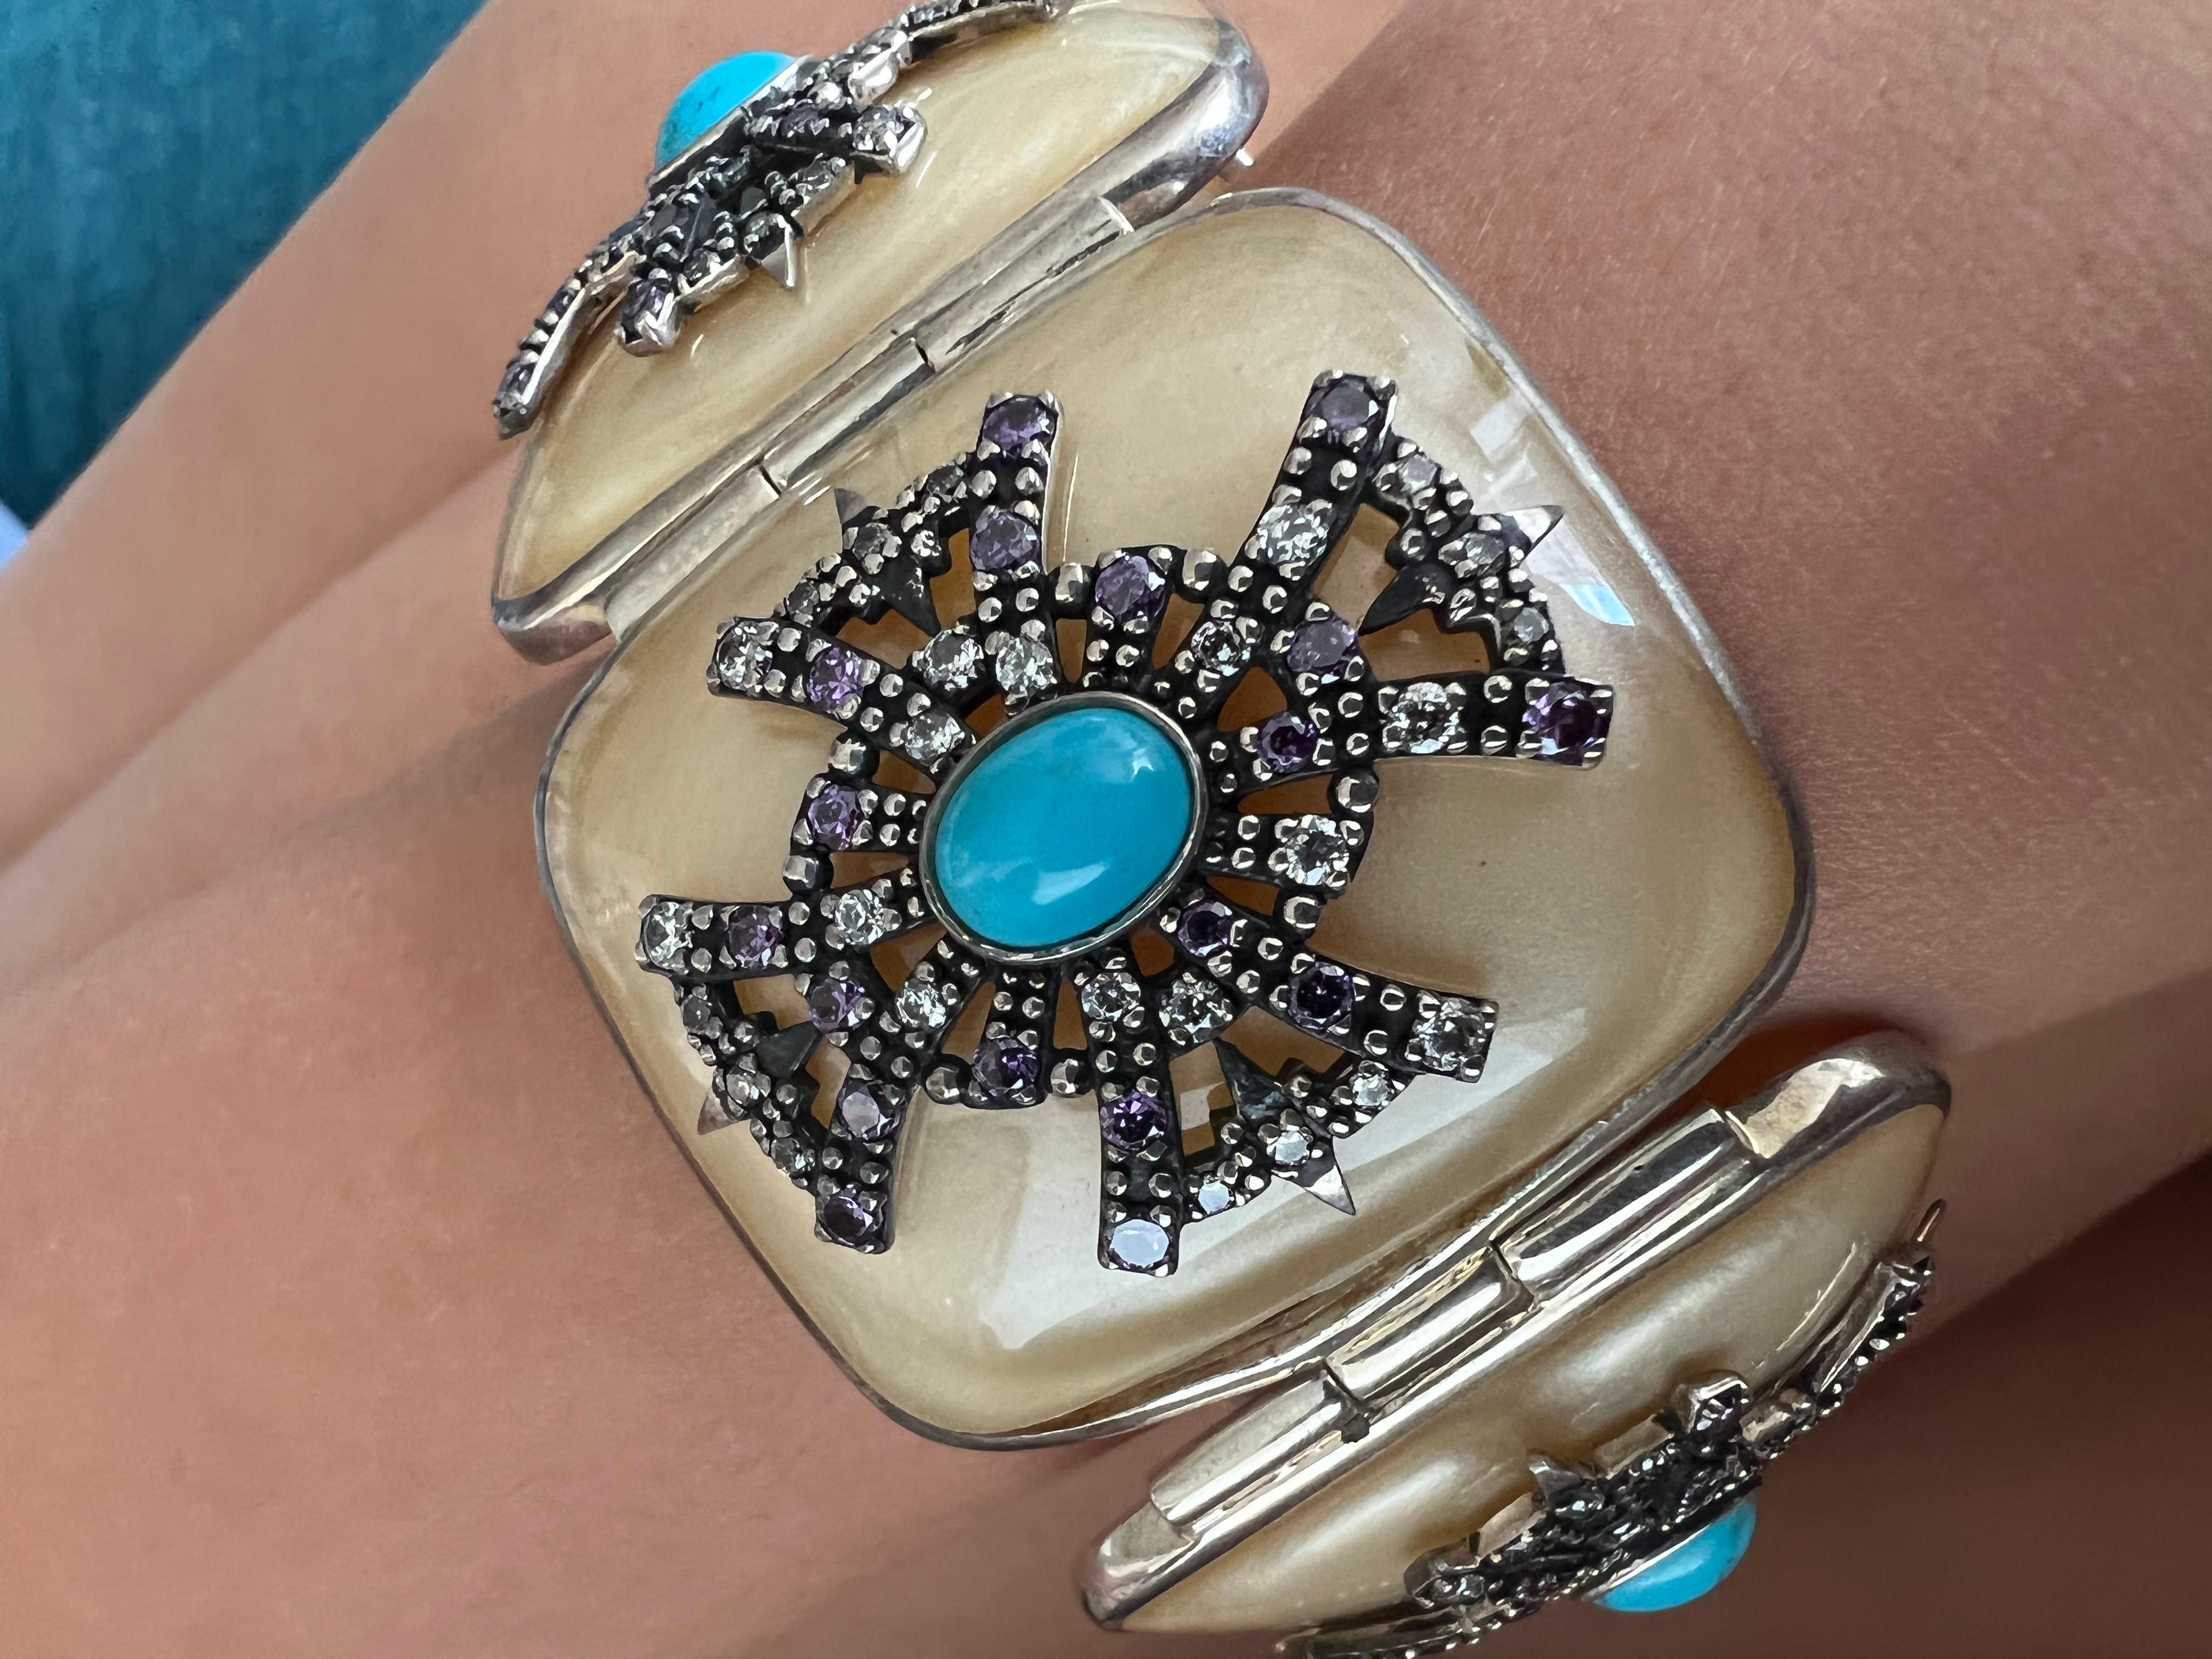 Miriam Salat link cuff. 
Vintage Sterling sliver.
Purple Topaz 
White Topaz 
Turquoise
All topaz stones are full facet round brilliant and all are hand set 
Milky translucent resin 
MRM singed 
Comes with a Miriam Salat pouch. 
Not many made 1 out